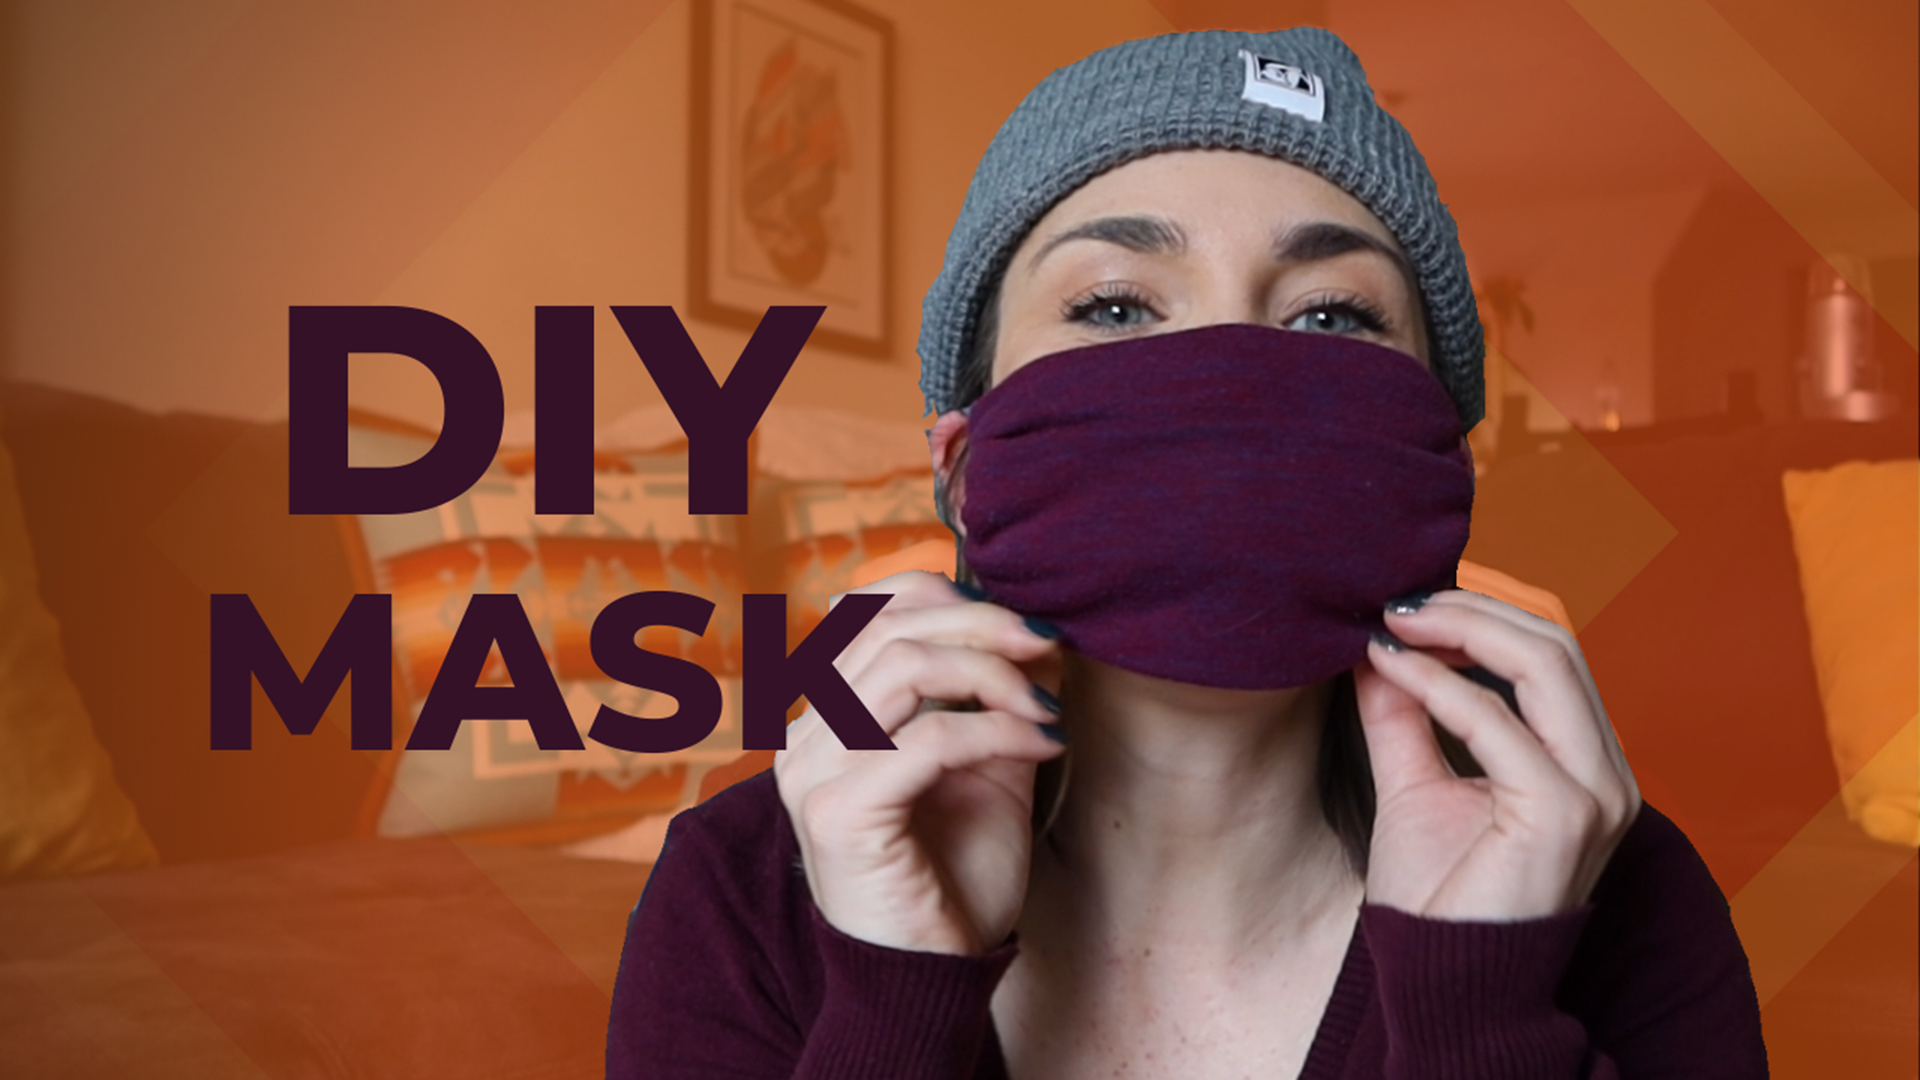 The CDC and the White House are now recommending that we all wear cloth protective masks when we go out in public. Cassidy Quinn shows how you can make one at home.